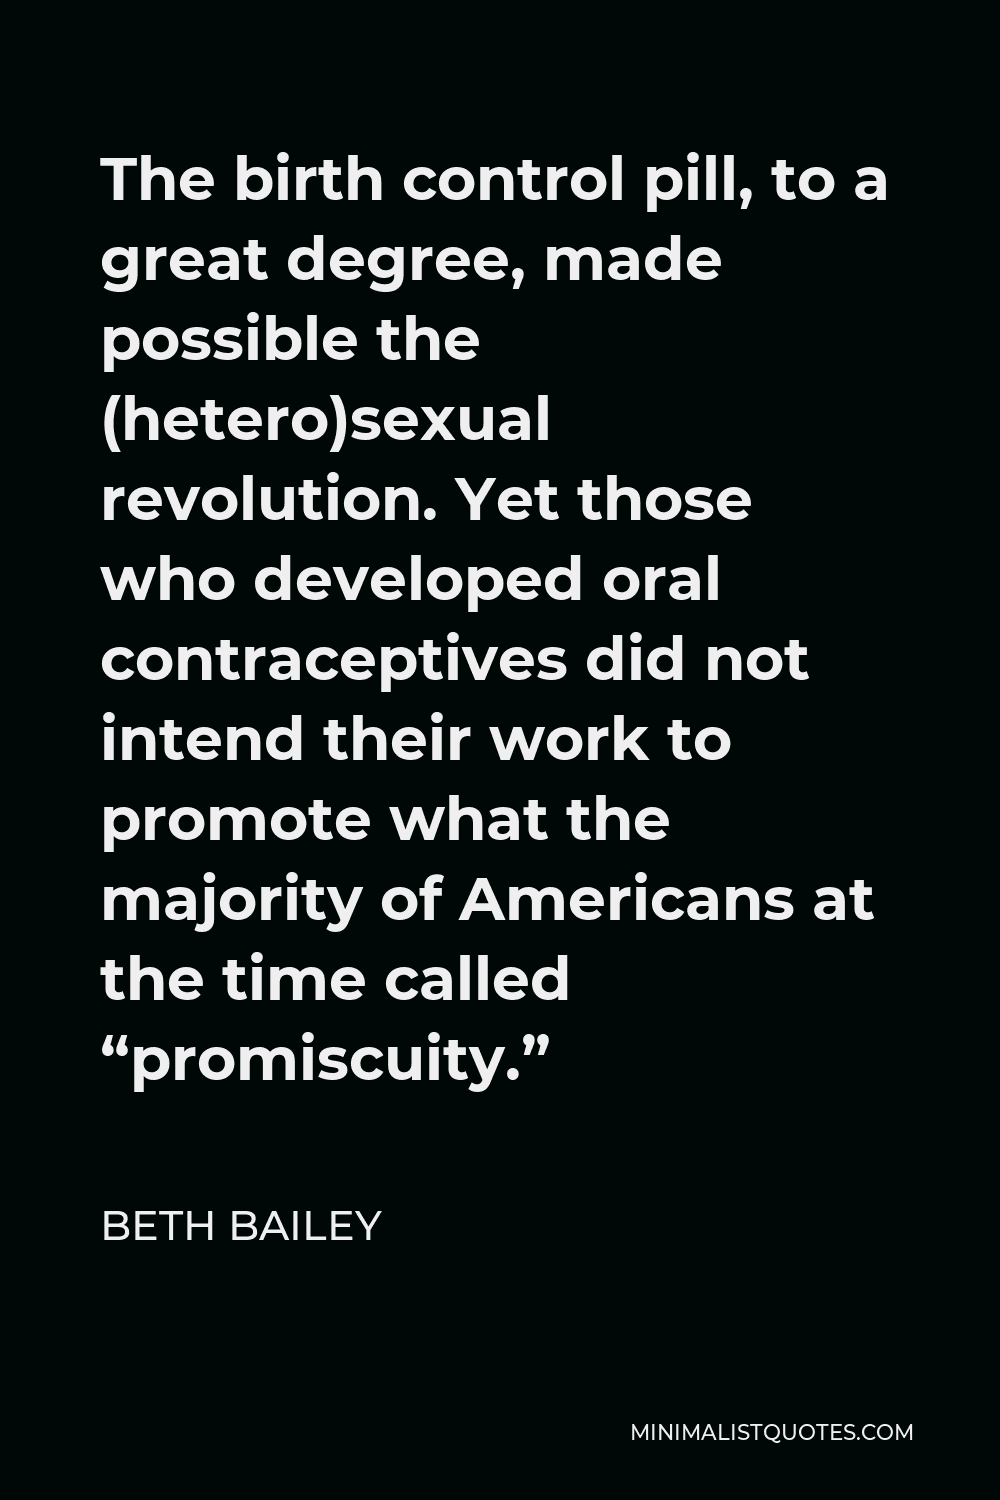 Beth Bailey Quote - The birth control pill, to a great degree, made possible the (hetero)sexual revolution. Yet those who developed oral contraceptives did not intend their work to promote what the majority of Americans at the time called “promiscuity.”